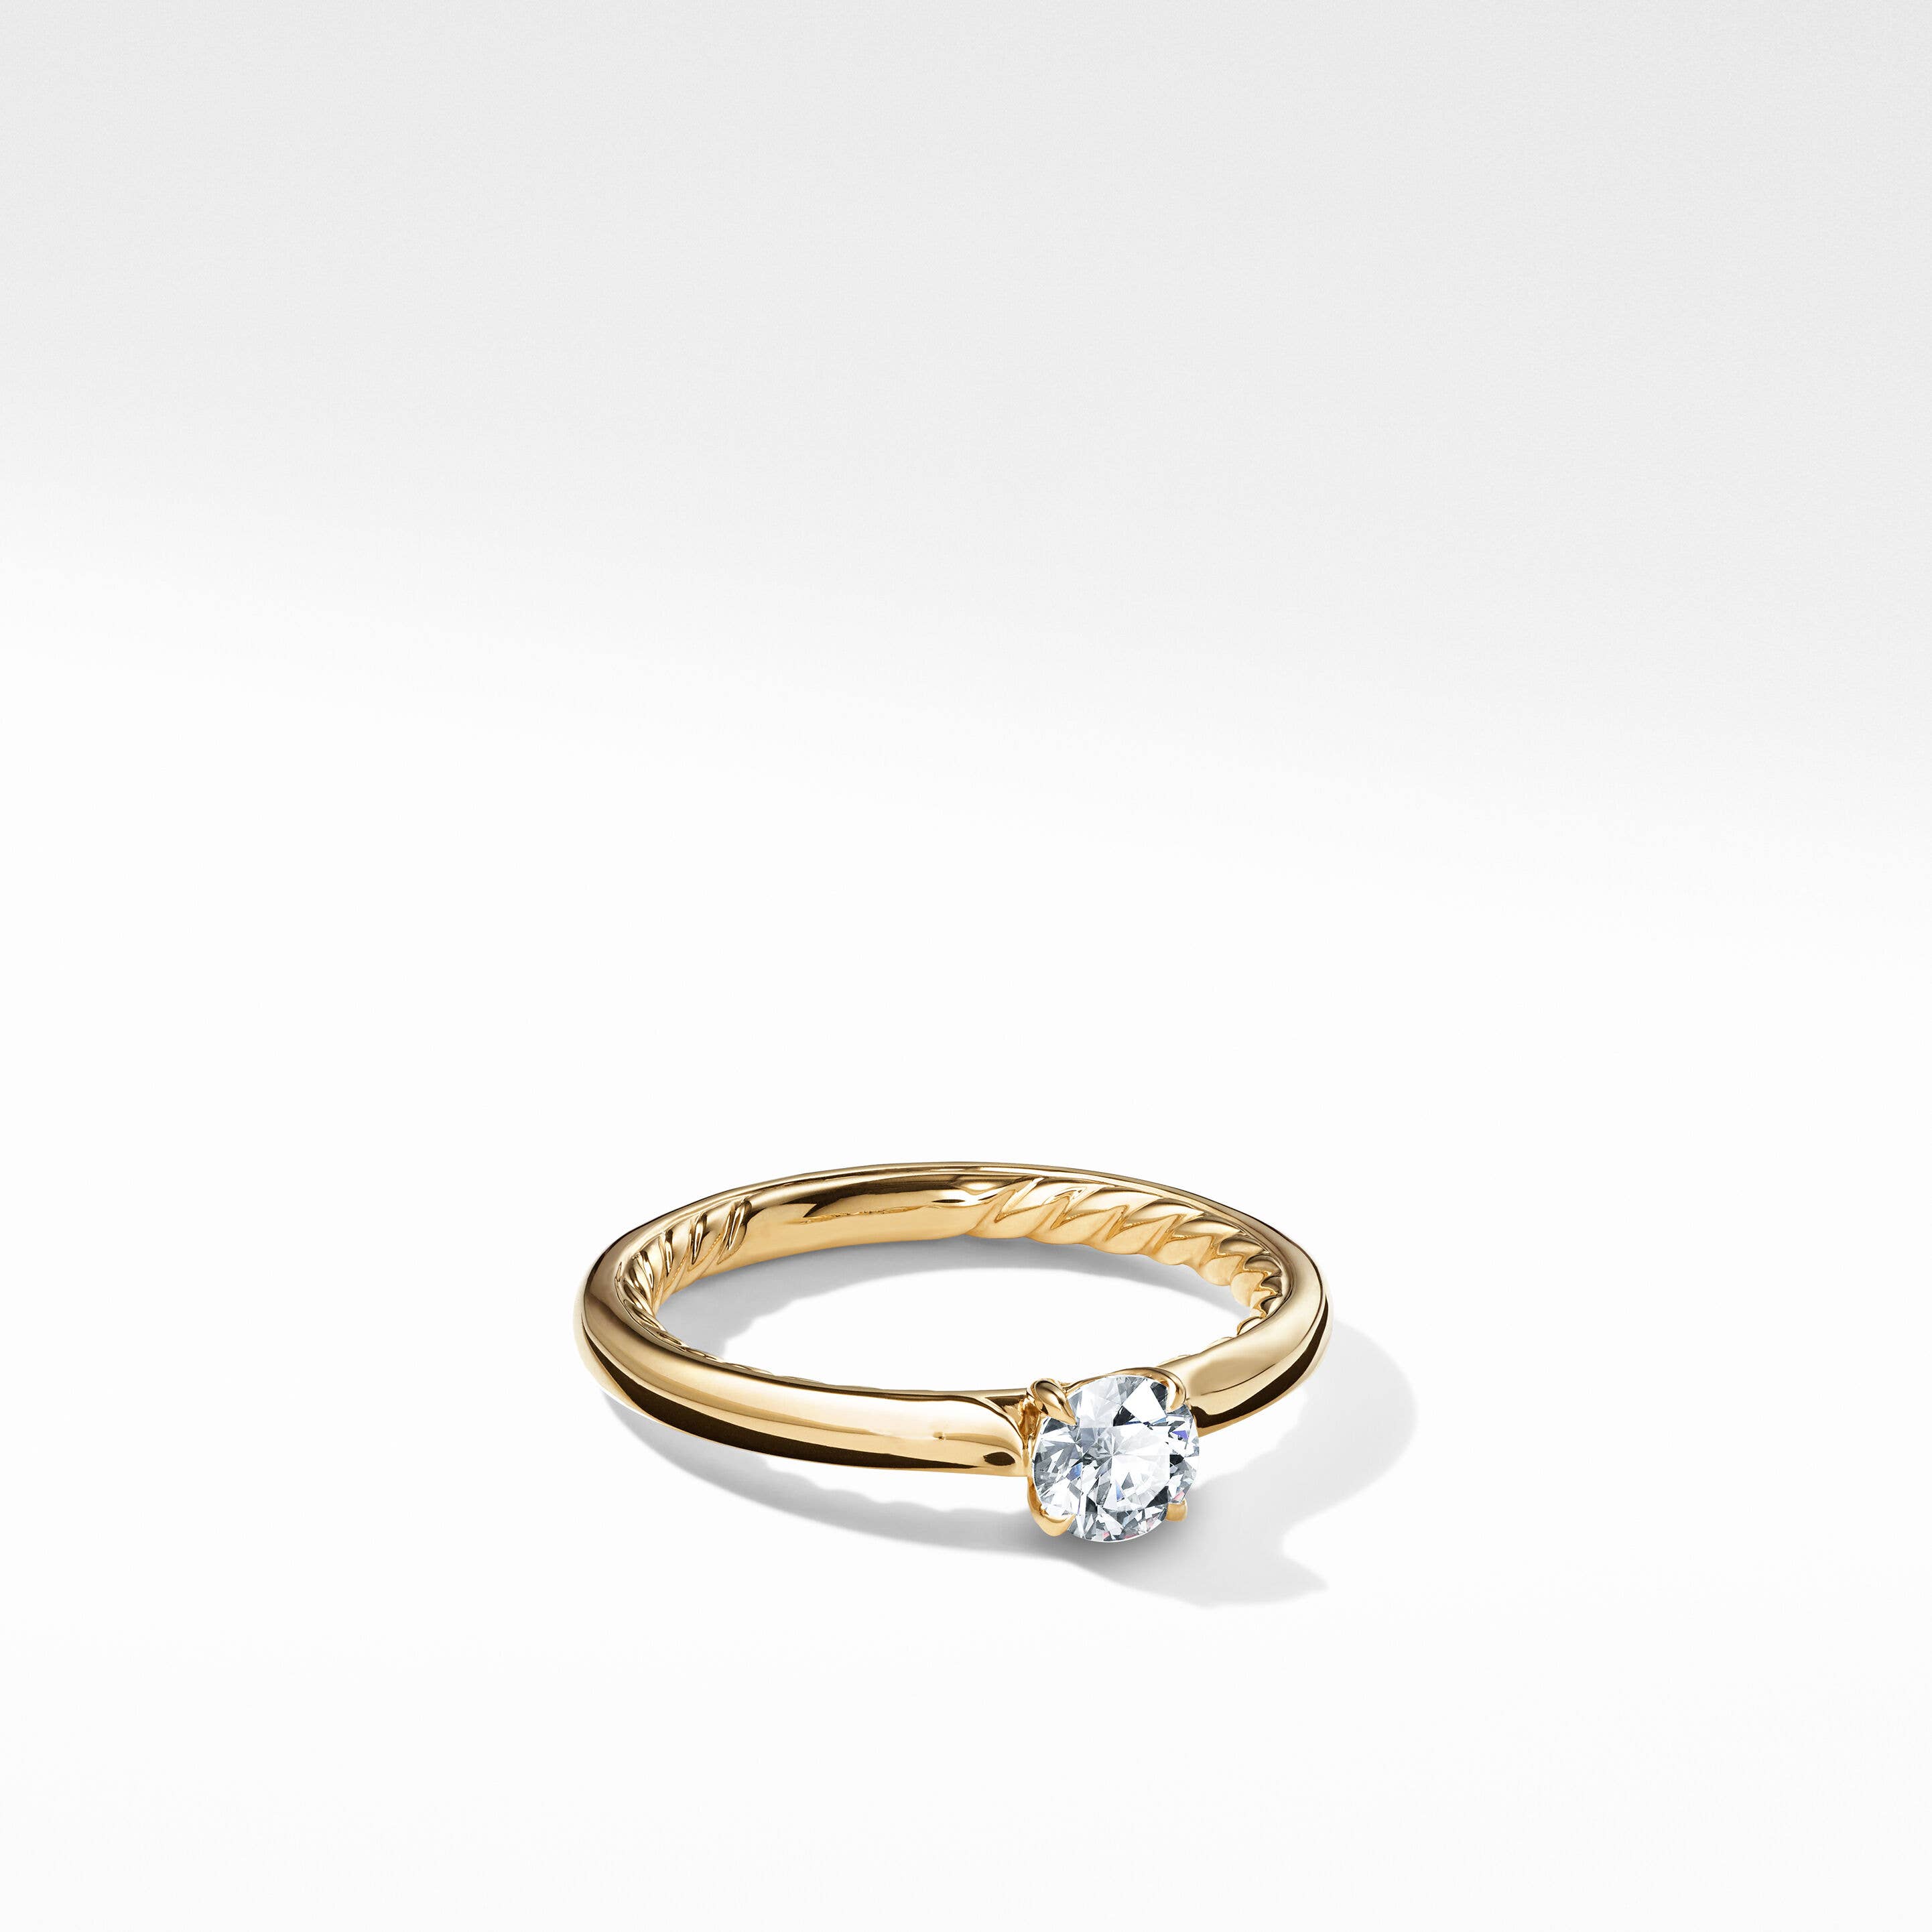 DY Eden Petite Engagement Ring in 18K Yellow Gold, Round